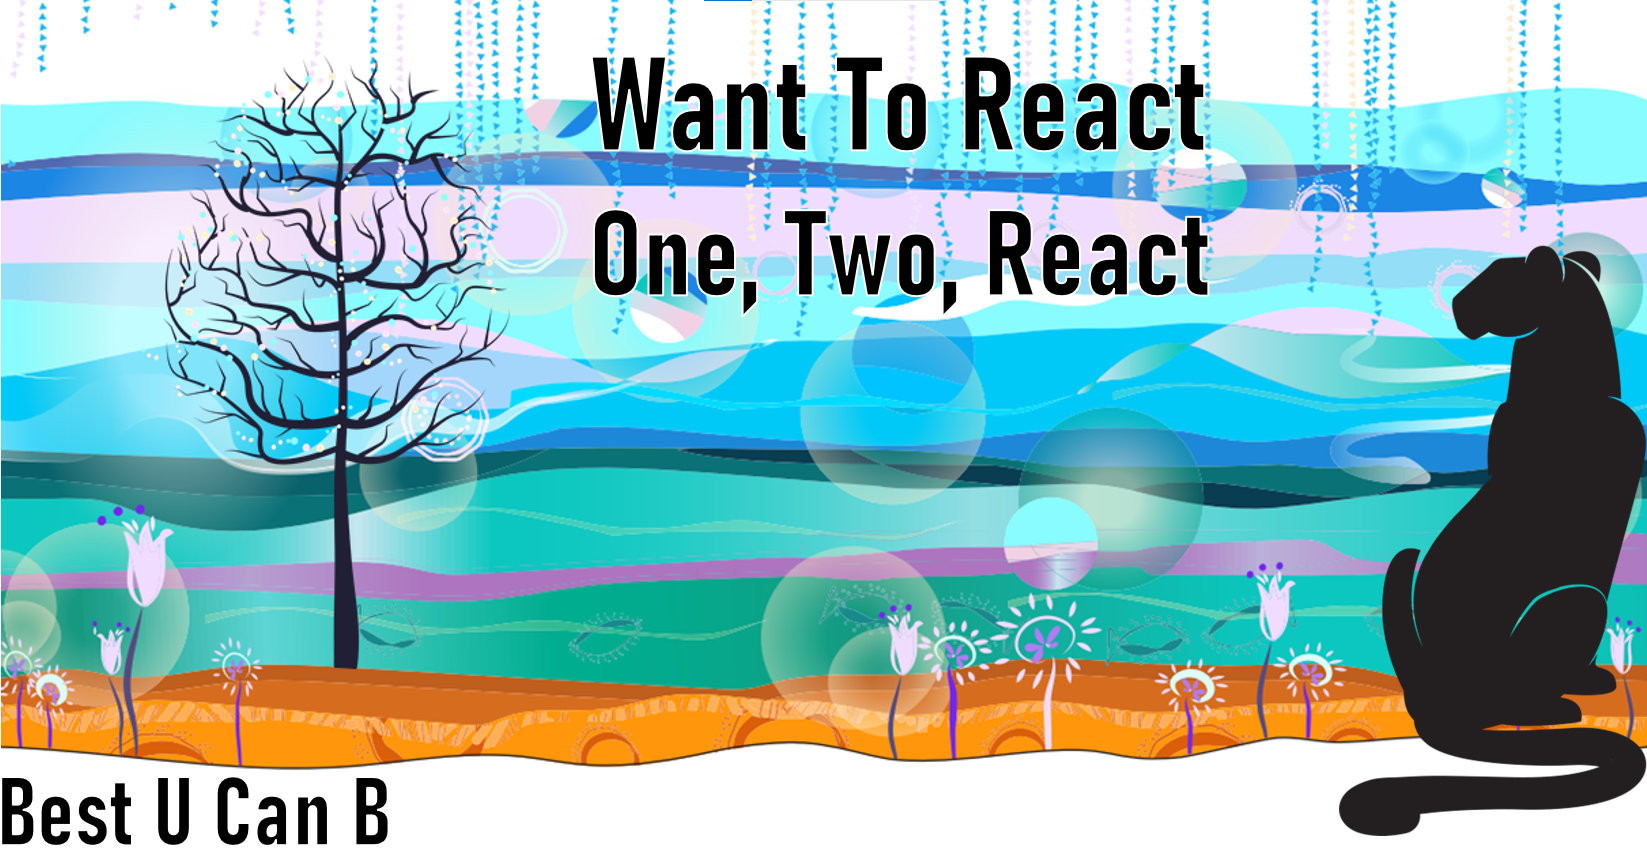 Want To React